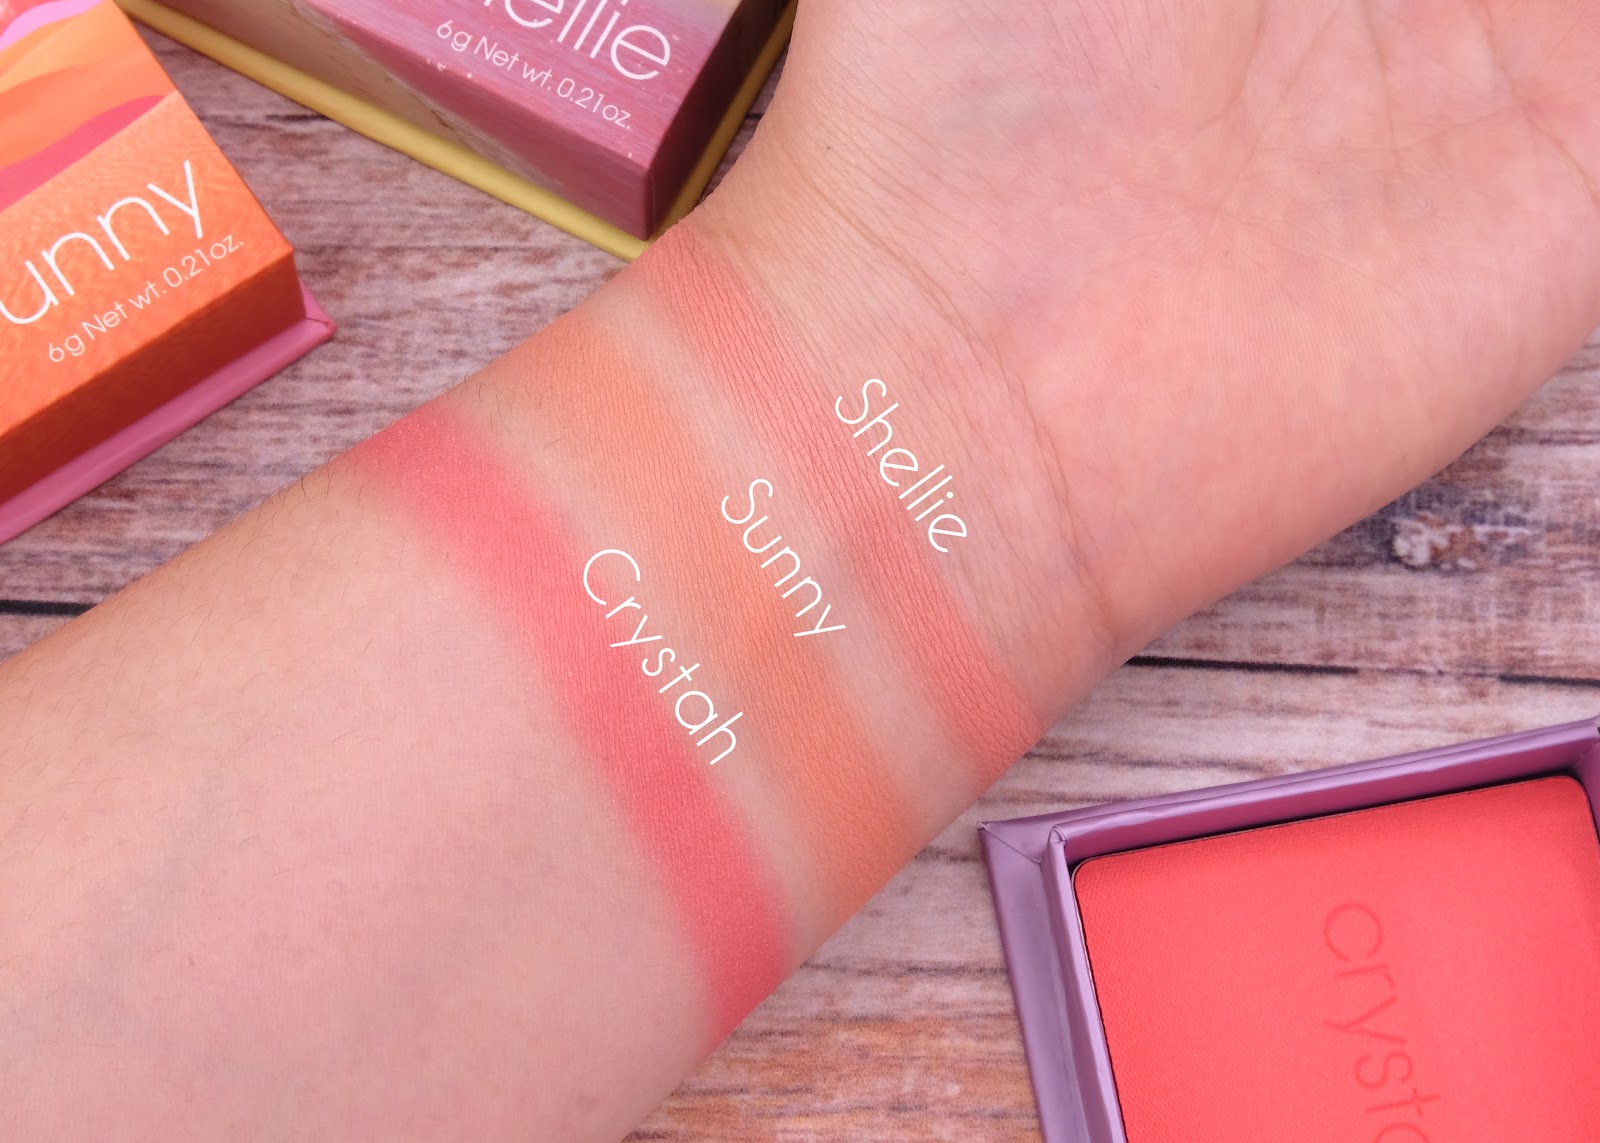 Benefit Cosmetics | WANDERful Blush in "Shellie", "Sunny" & "Crystah": Review and Swatches